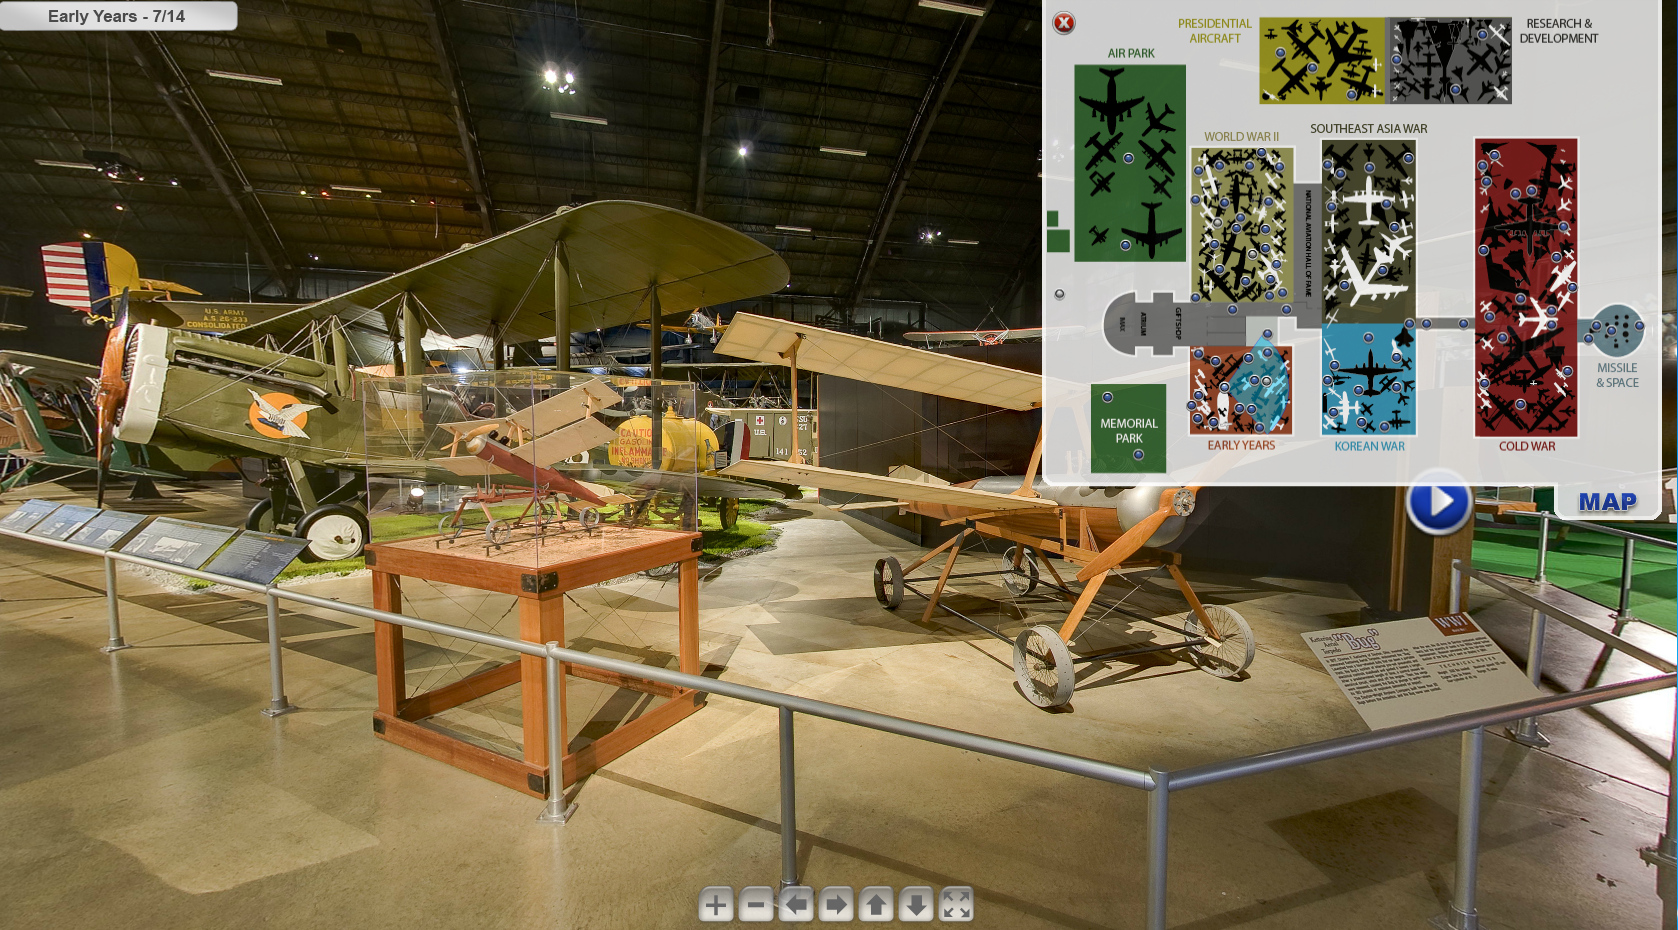 Screenshot of the "Early Years" gallery virtual tour 